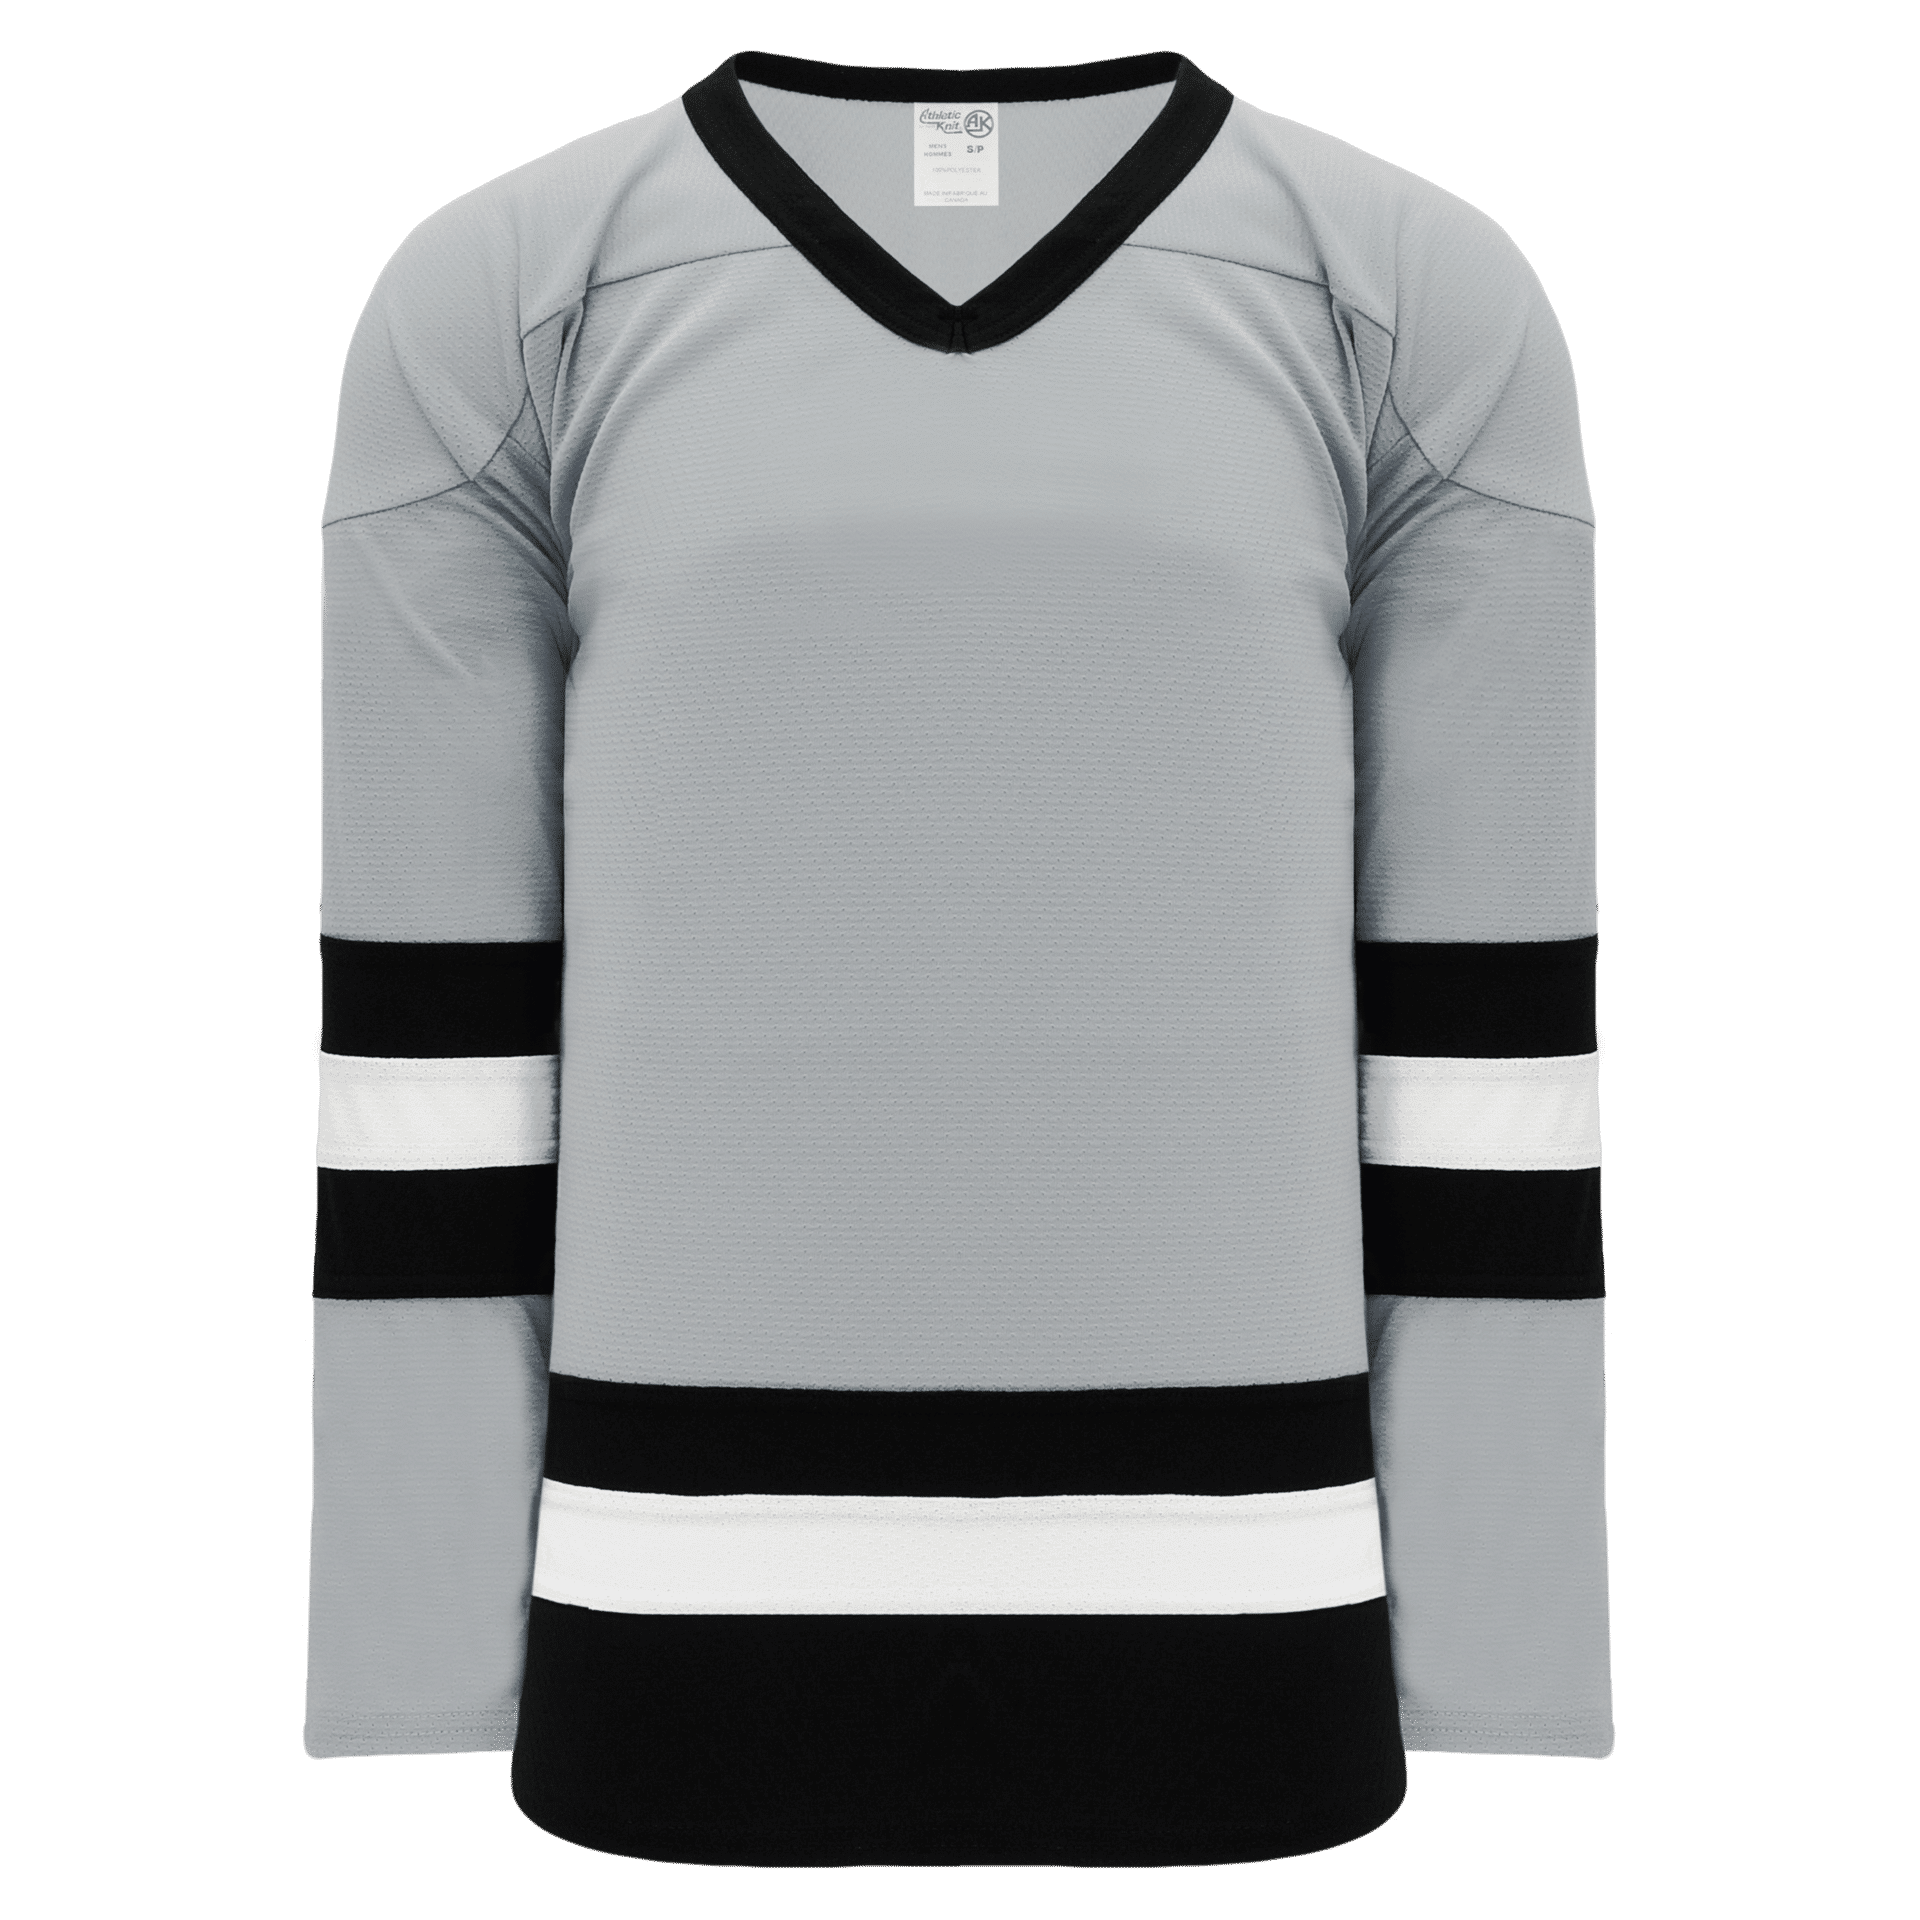 AthleticKnit: Fabrics and colors for your customised jerseys and apparel